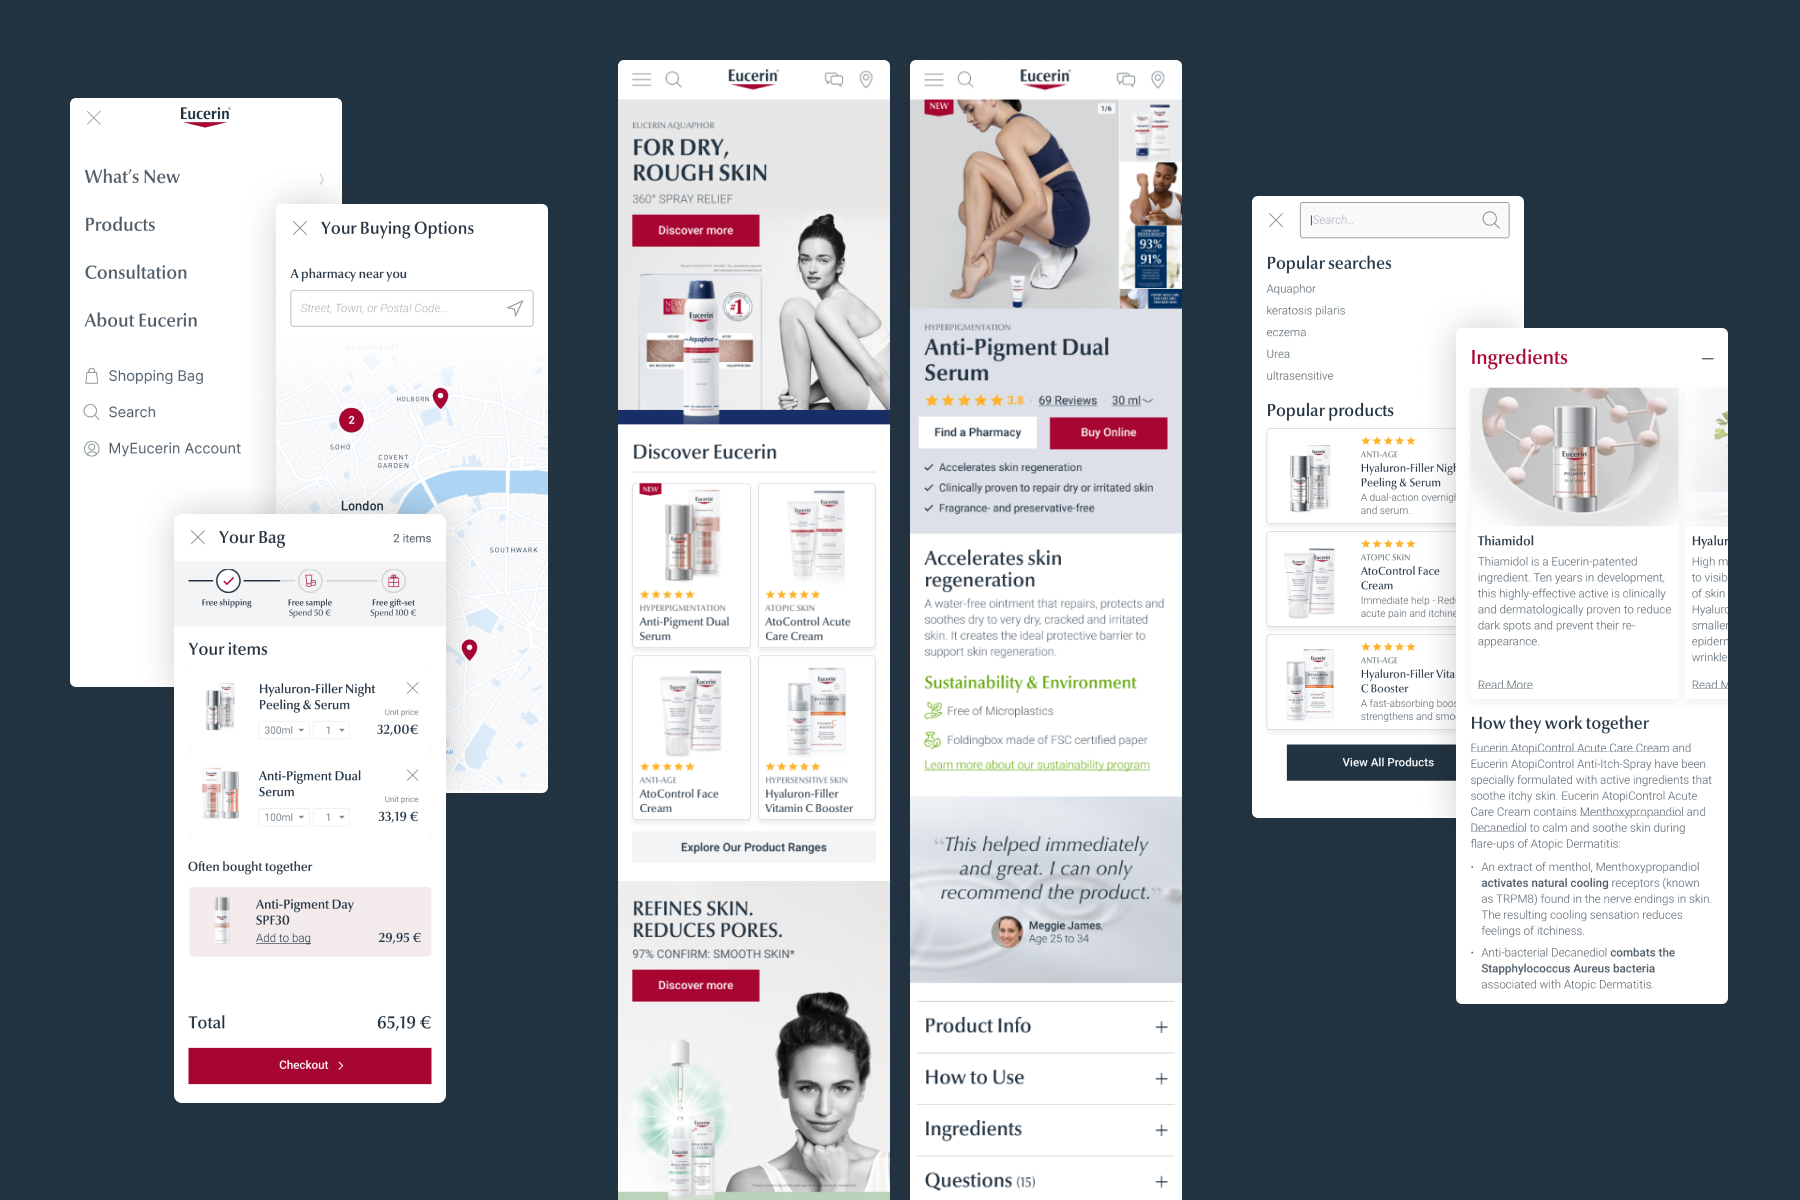 Various final mobile-first UI designs for the Eucerin website on a dark blue background